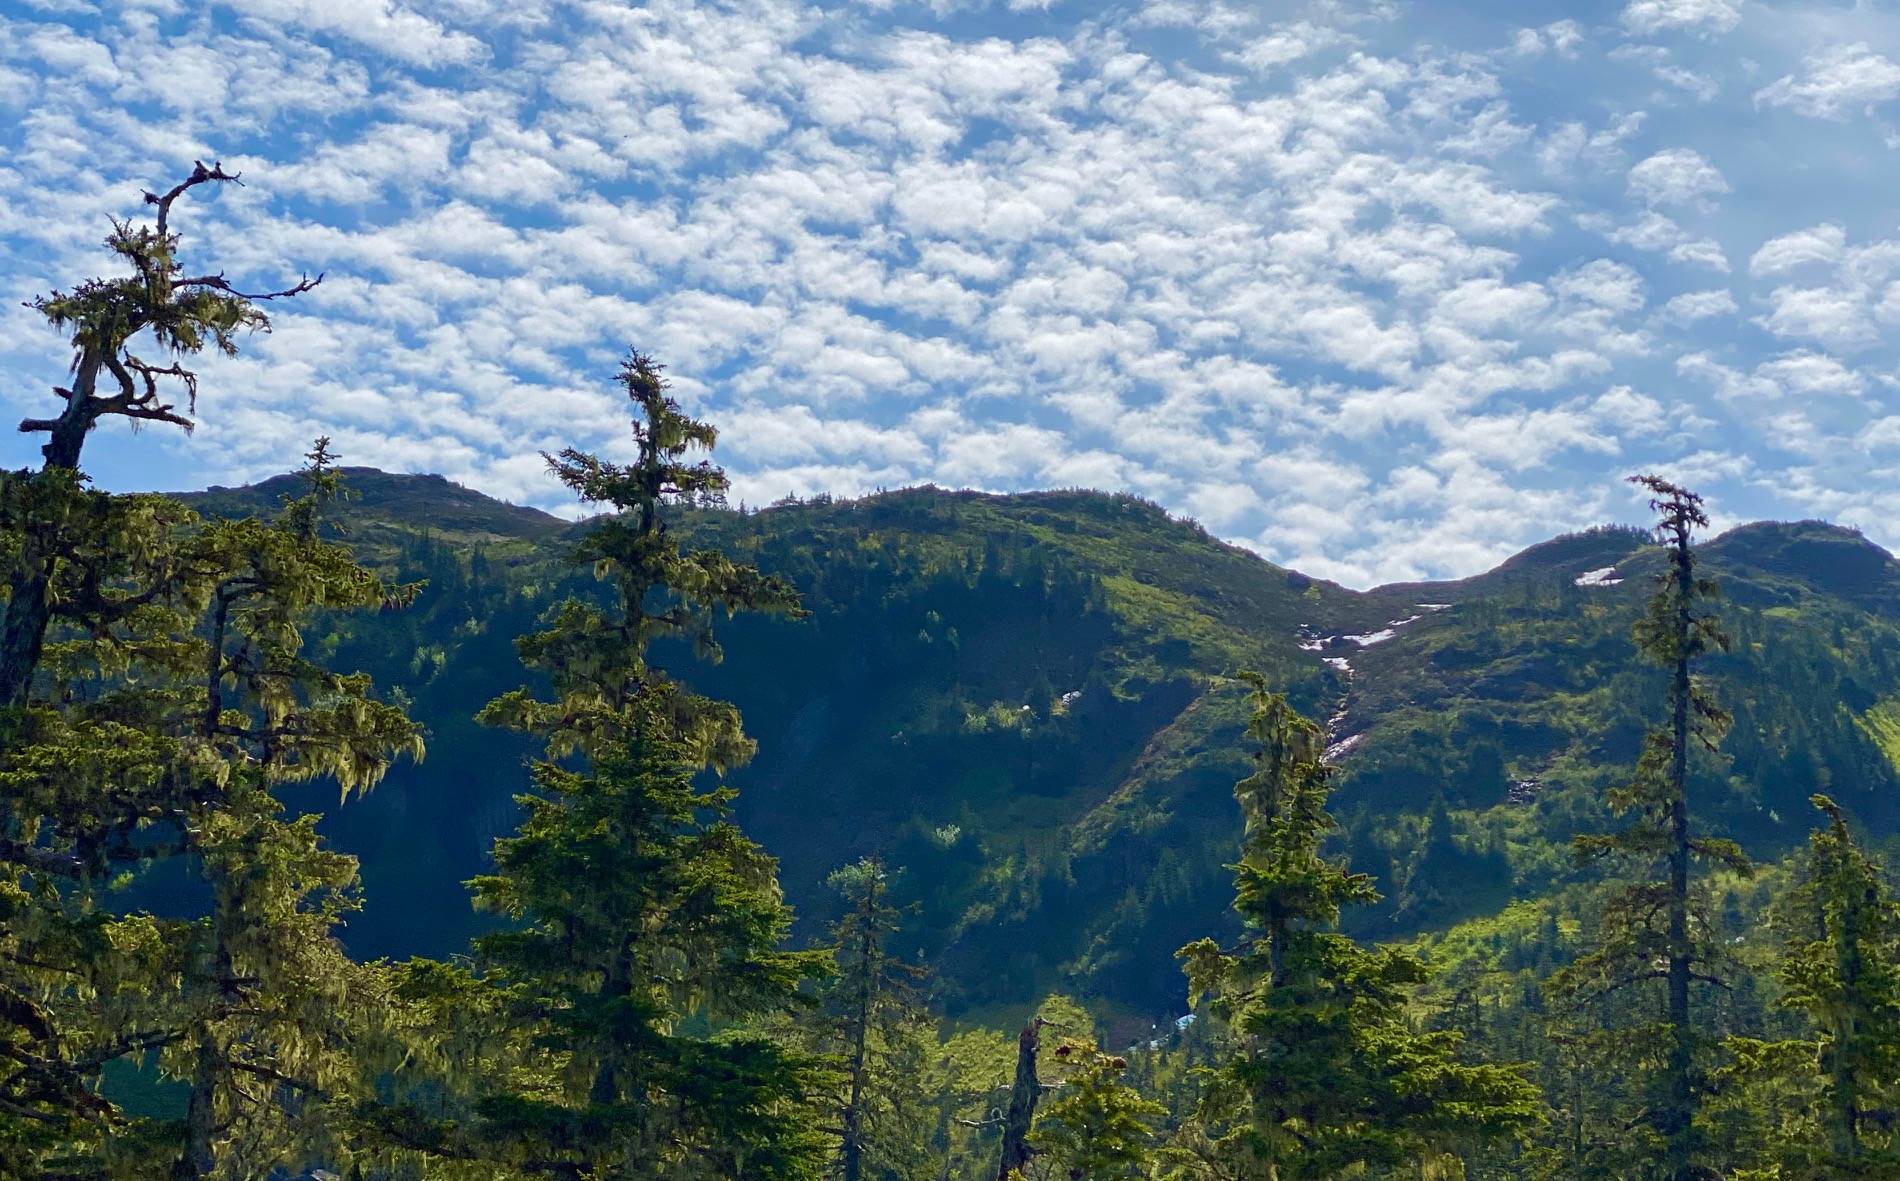 Farewell Ridge with formations of mackerel clouds above as seen on July 3, 2020. (Courtesy Photo | Denise Carroll)